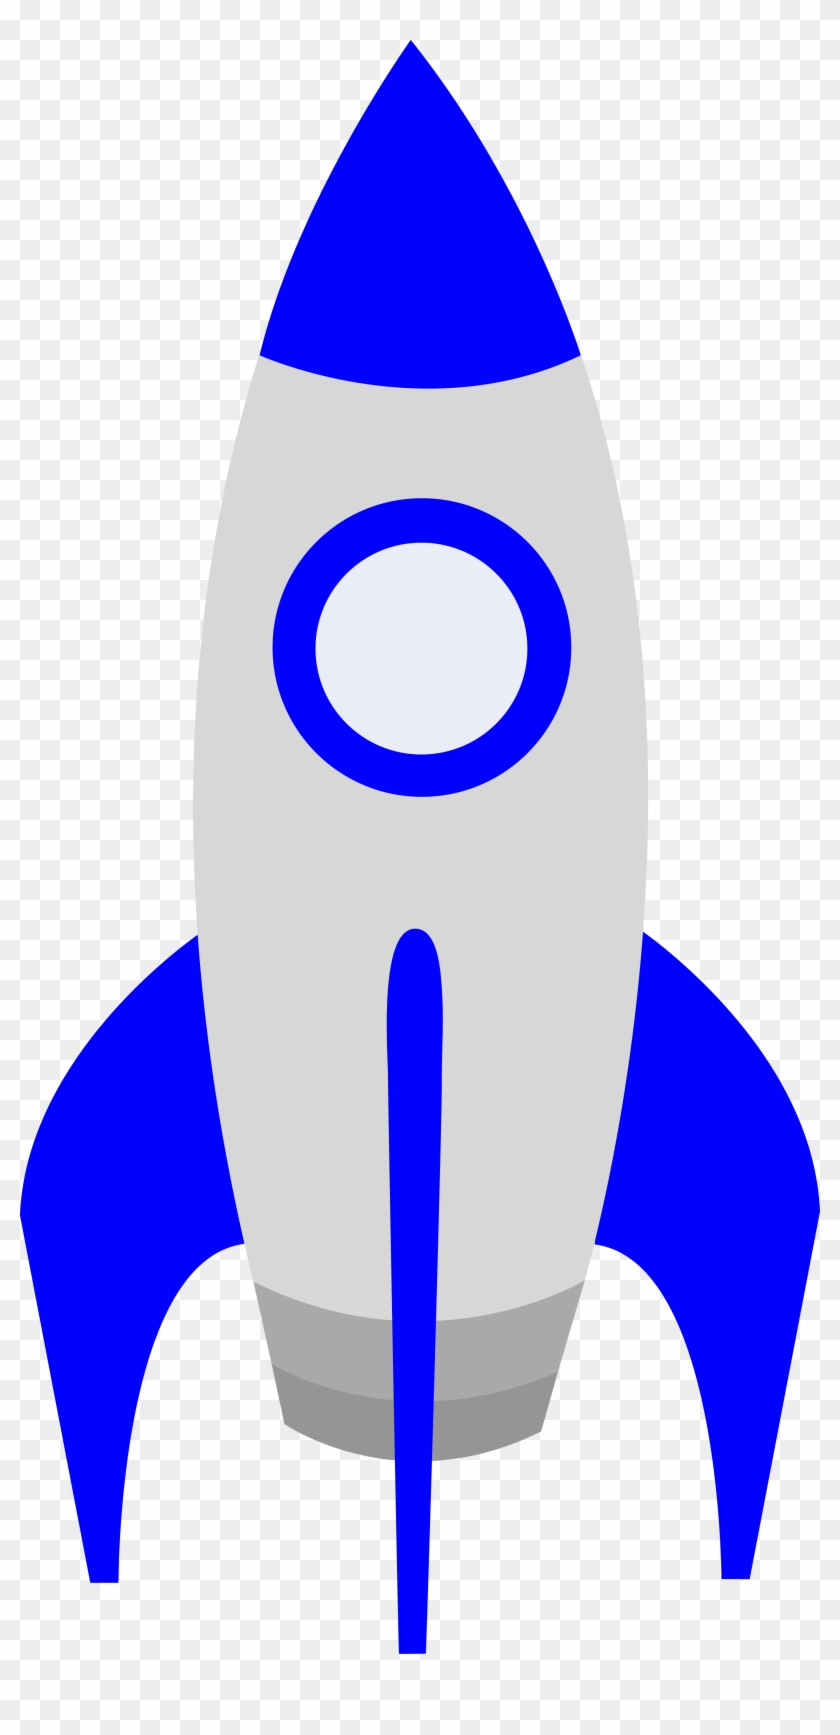 Clipart For Outer Space - Rocket Ship Clip Art #14587